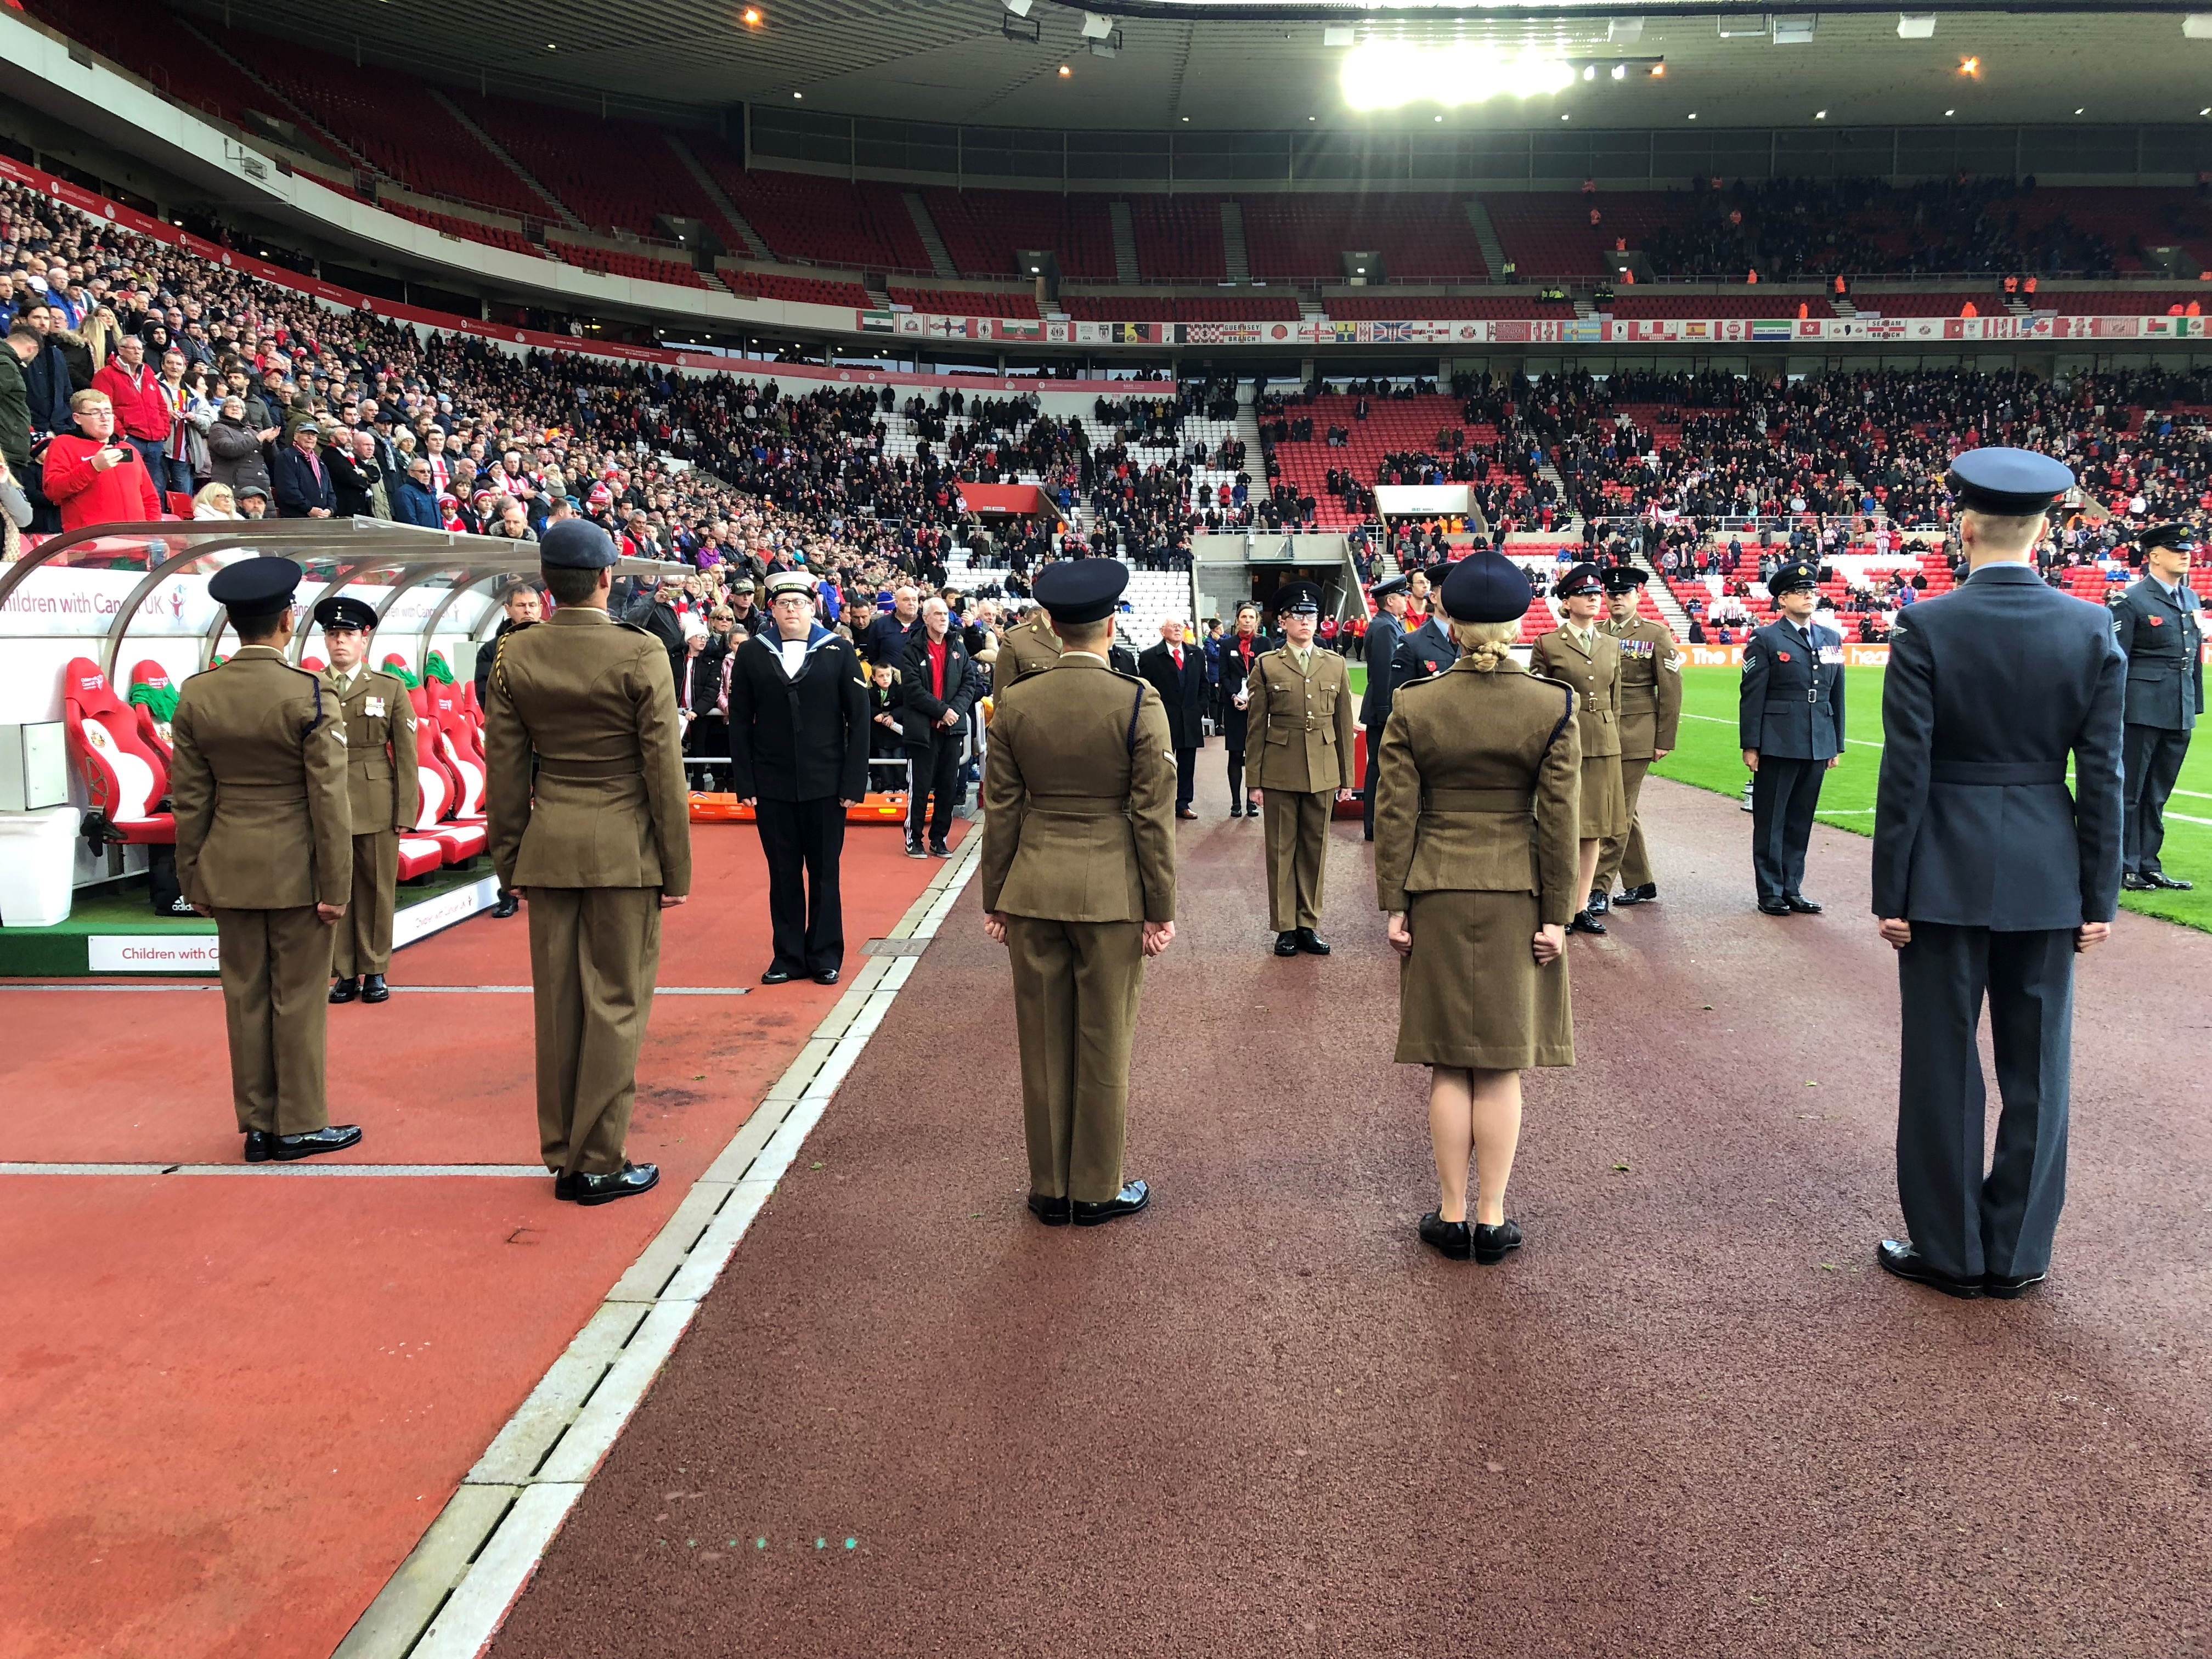 Silver Award For Sunderland AFC Thanks To Support Provided To Military Community